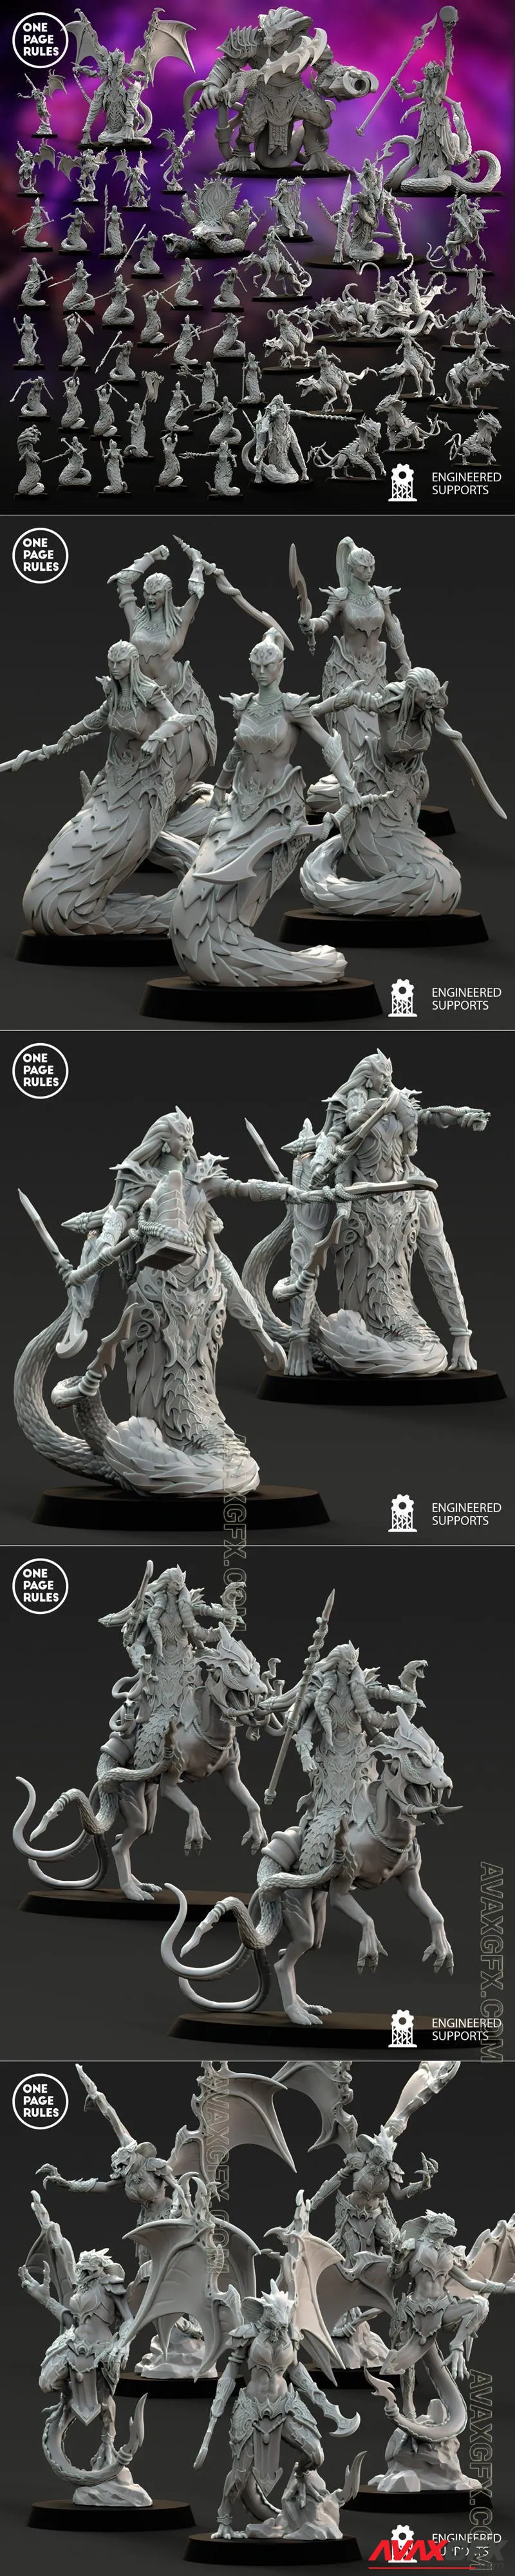 One Page Rules - Lust Daemons Army Bundle - STL 3D Model